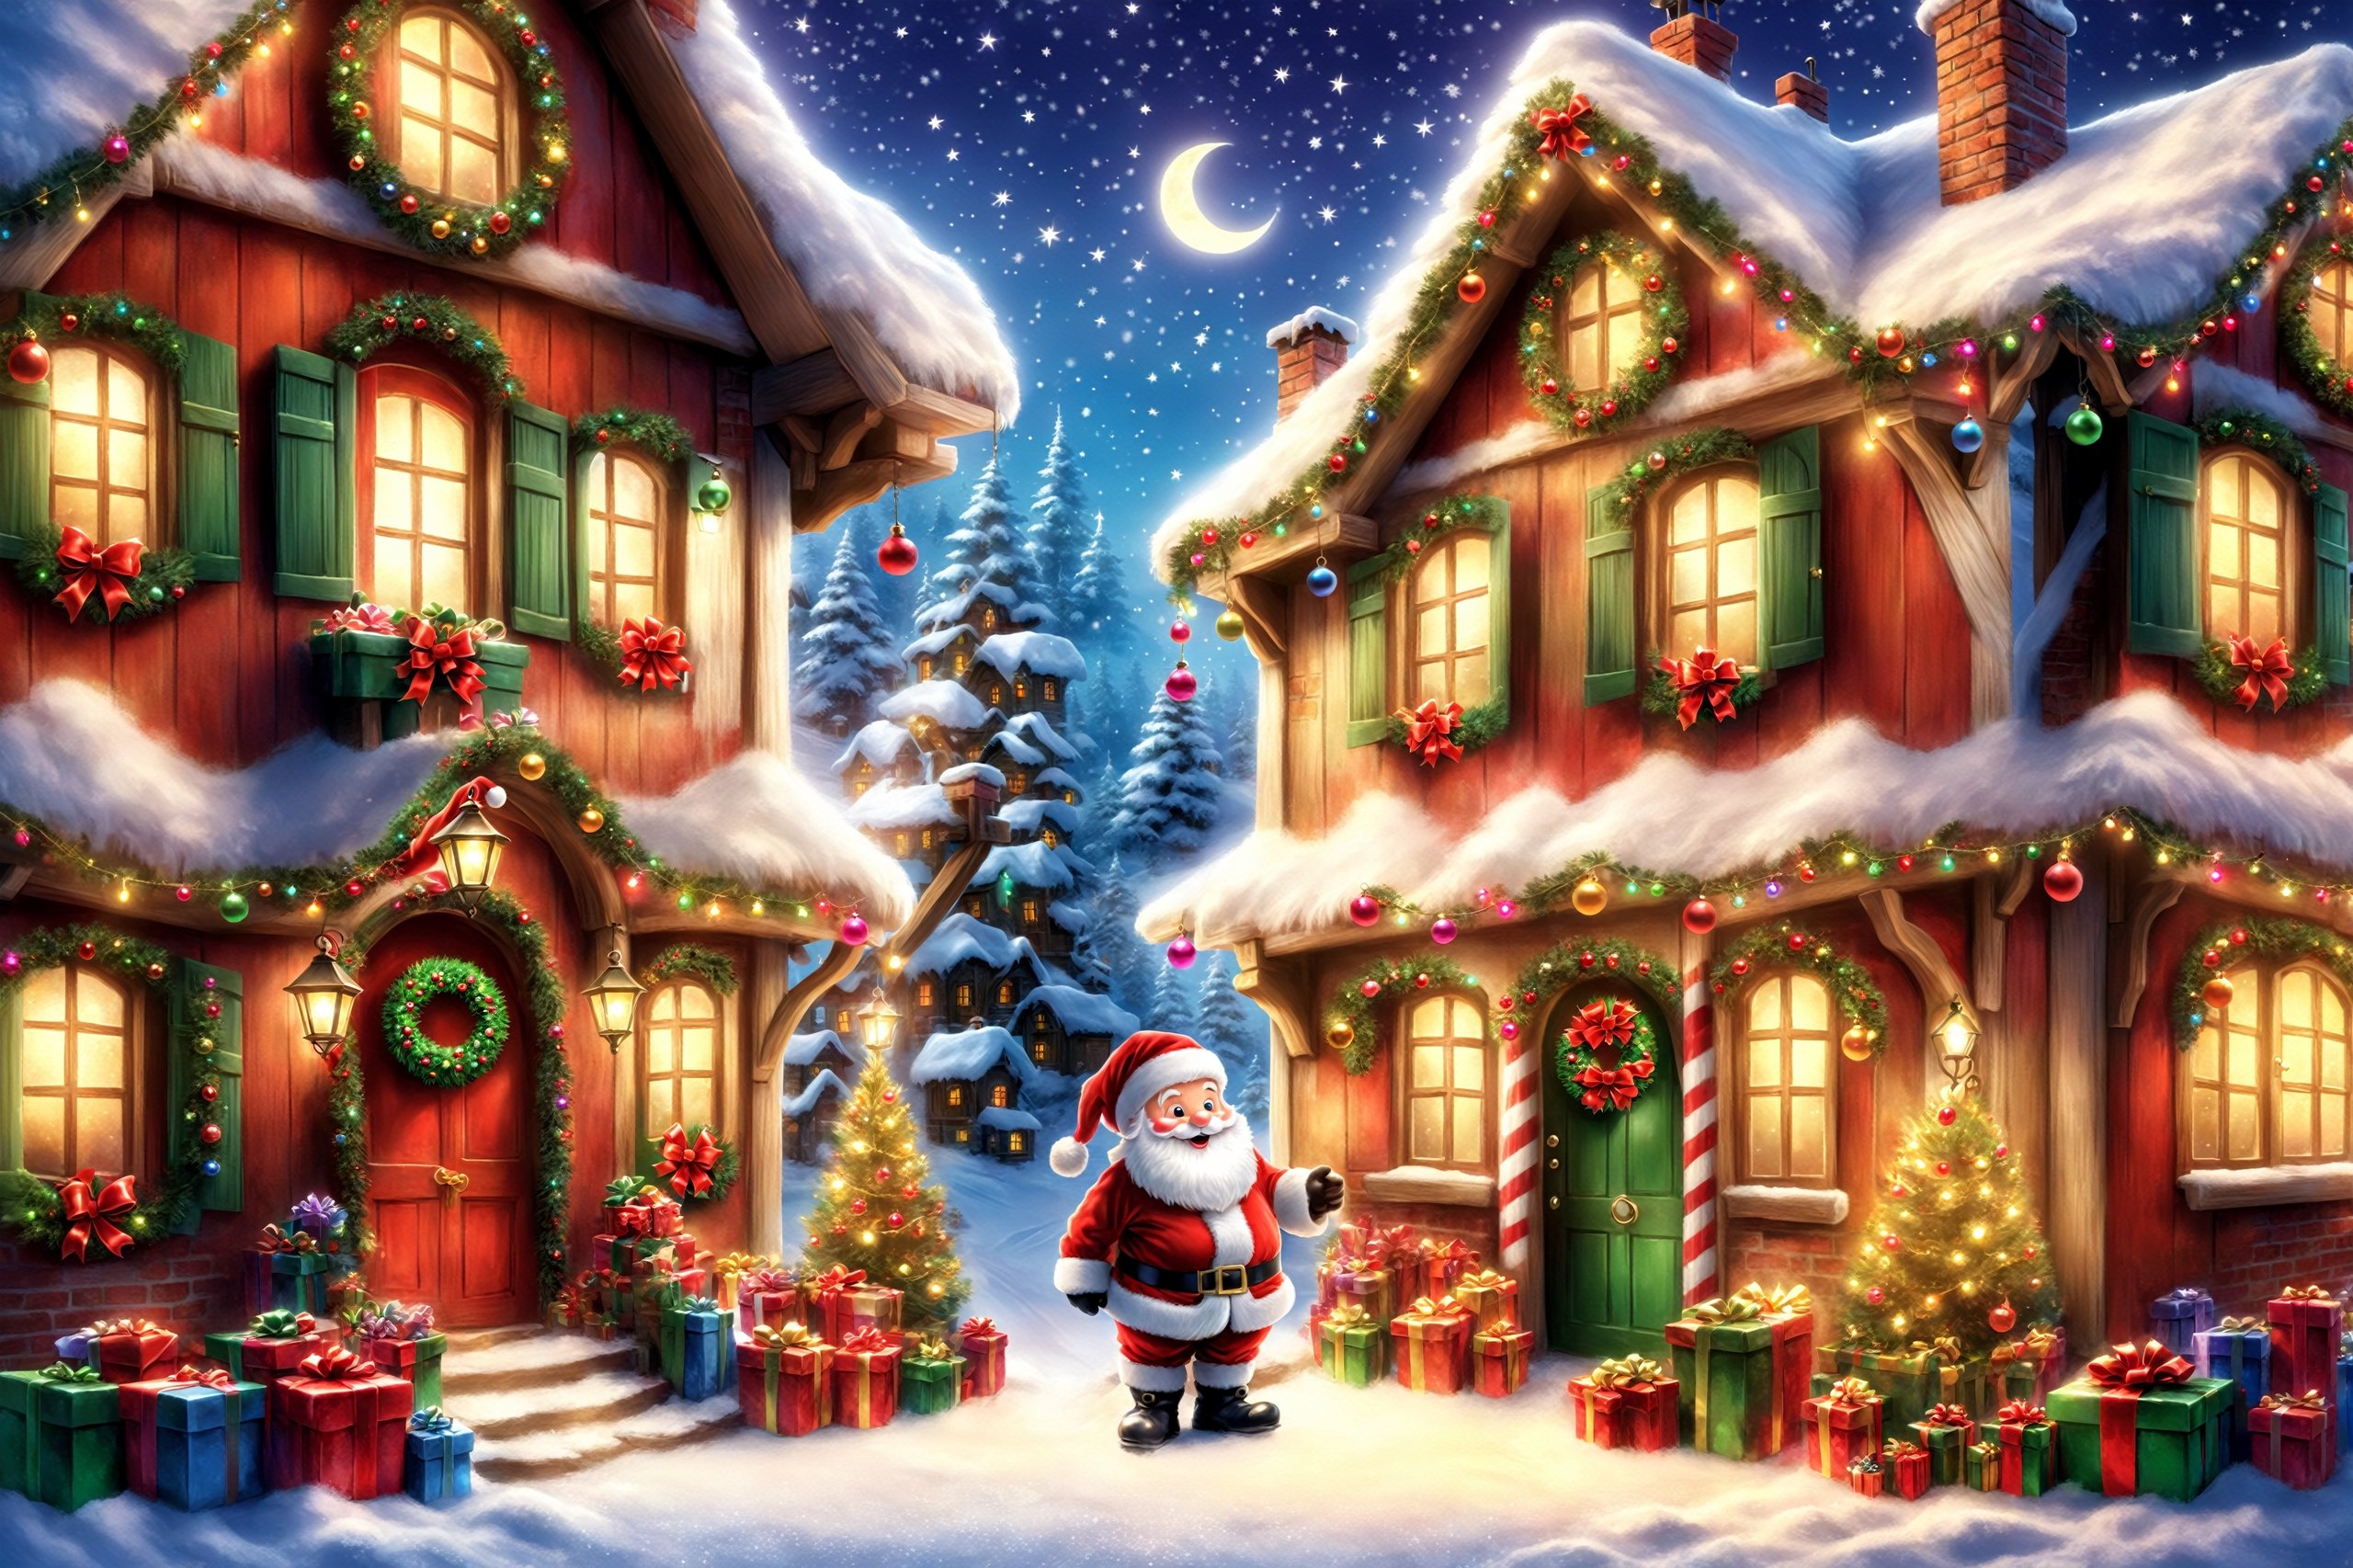 Create a magical image of Santa Claus and his elves decorating their home before the upcoming holidays. Add lots of bright garlands, cheerful balls, glittery ribbons and other festive decorations. Show a joyful and cheerful moment when the whole house is filled with the magic of Christmas!